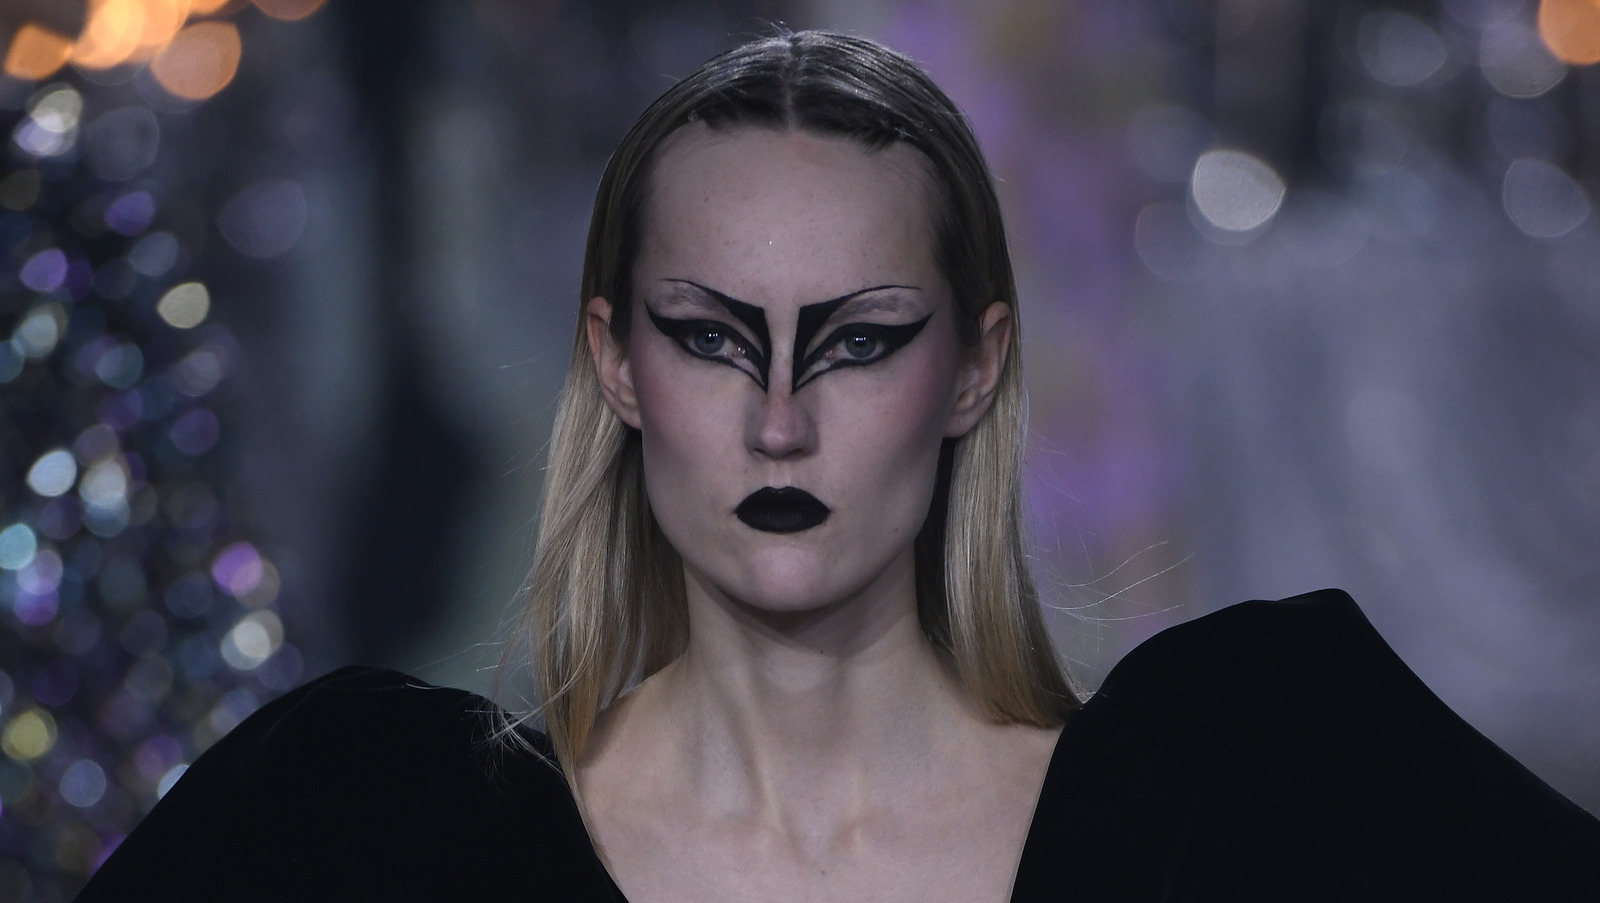 Goth Fairy' Makeup Is Trending - Here's How To Get The Look